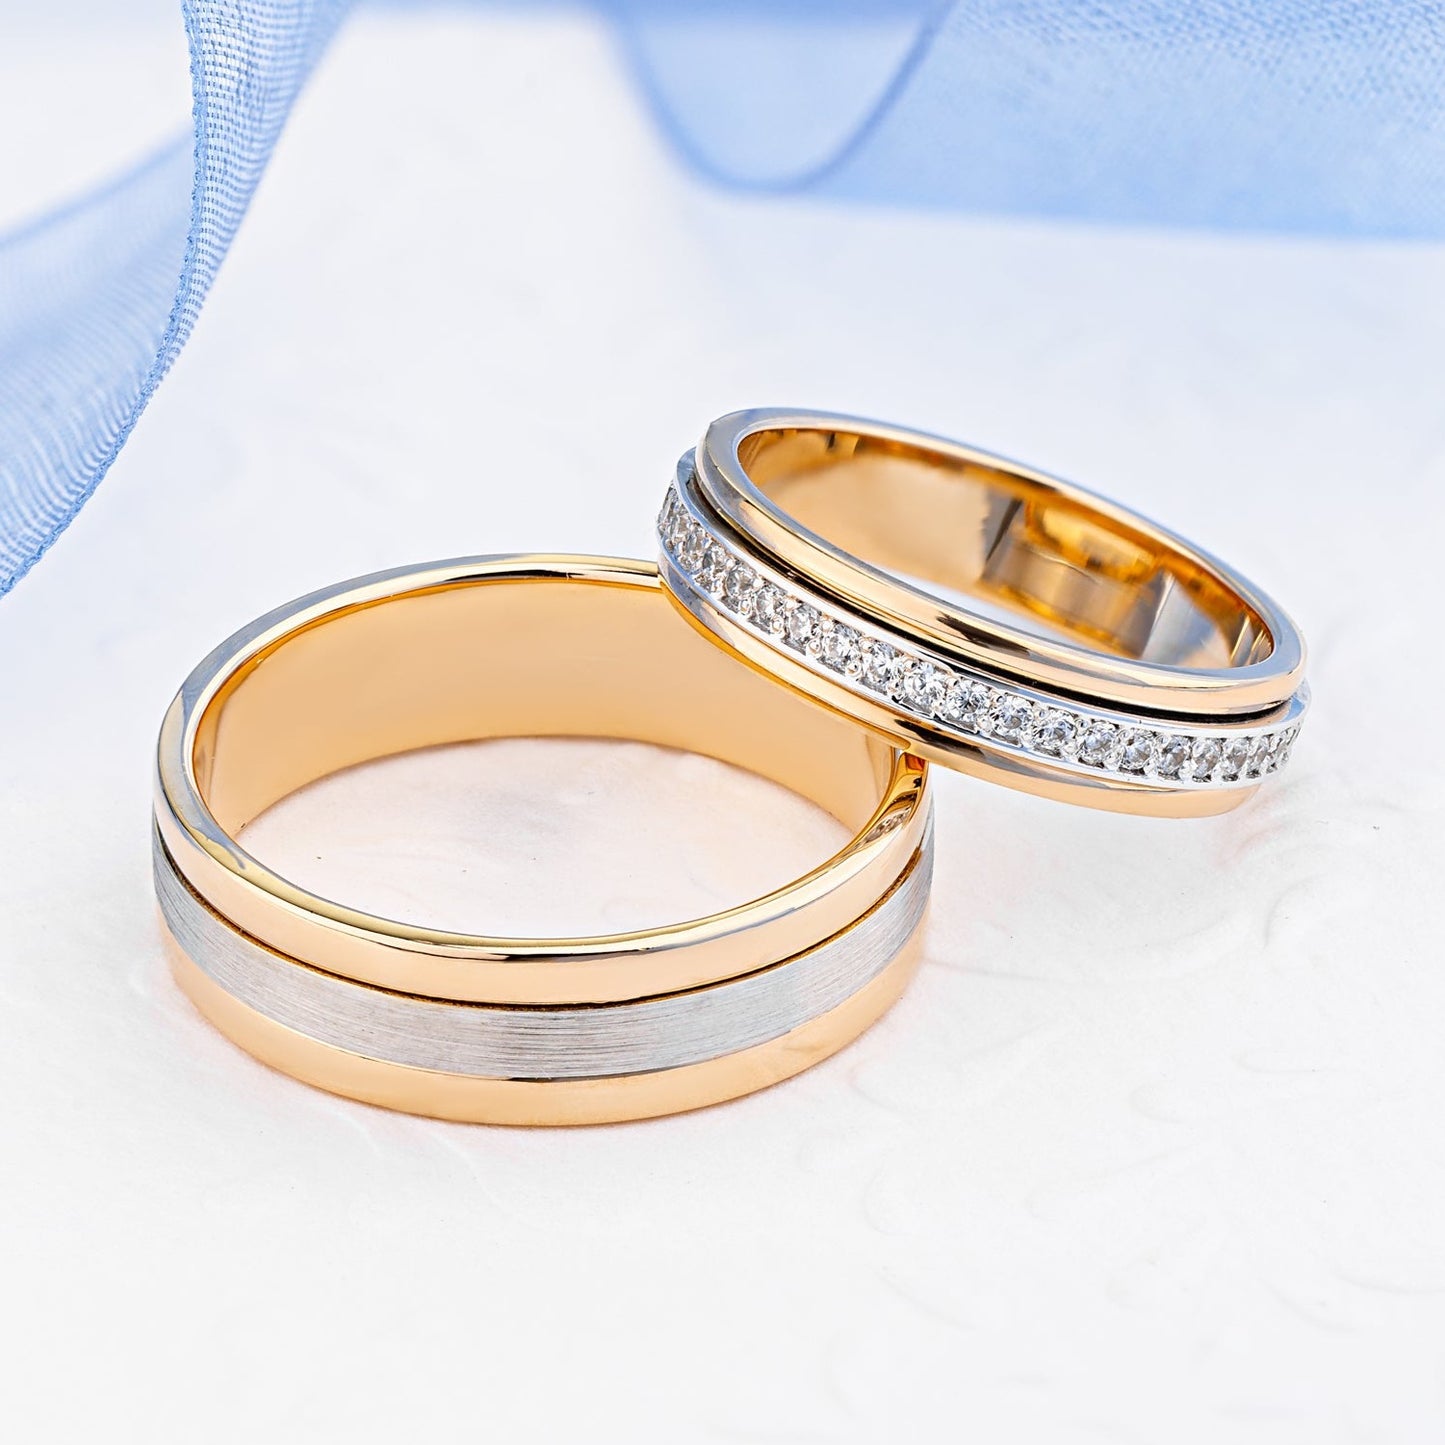 Couple rings made of 14k gold. Matching wedding bands. His and hers wedding rings set. Two tonw wedding bands. Gold wedding rings set